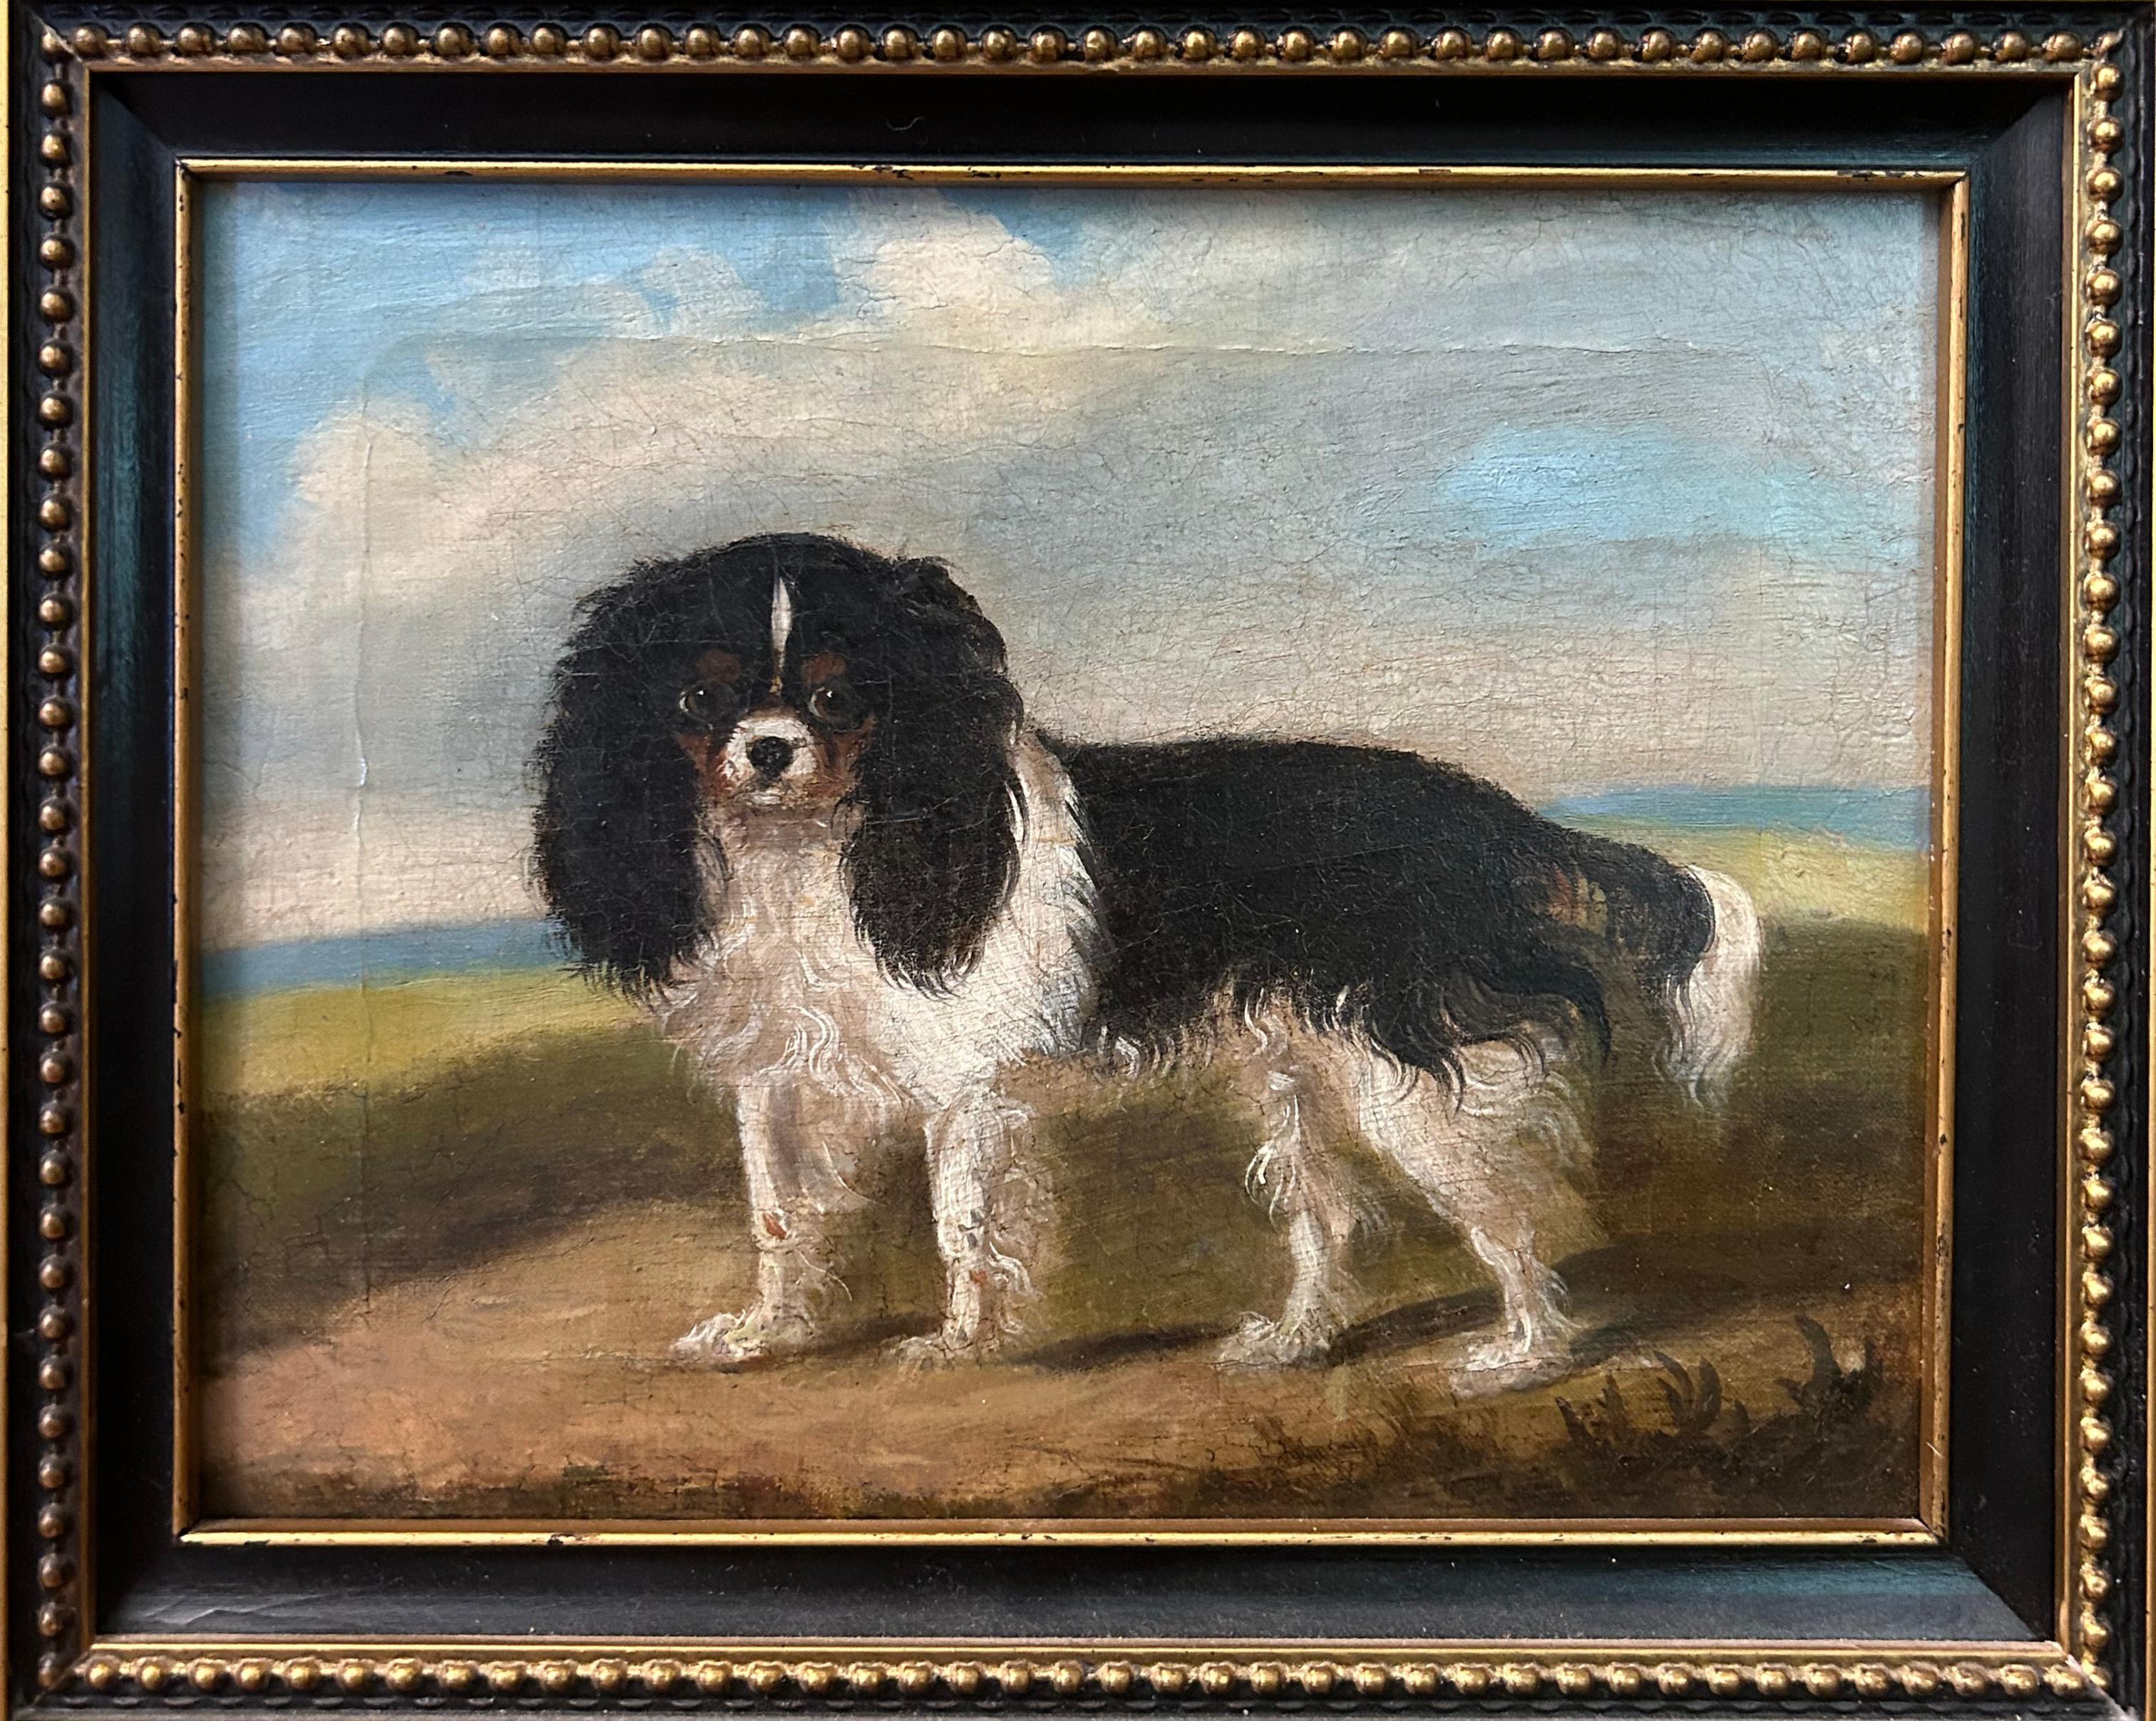 This early to mid 19th century diptych features a pair of King Charles Spaniels, one with a Blenheim coat (left) and one with a black coat. The unidentified artist chose a medium of oil on canvas for the canines, and presents the dogs in a realist